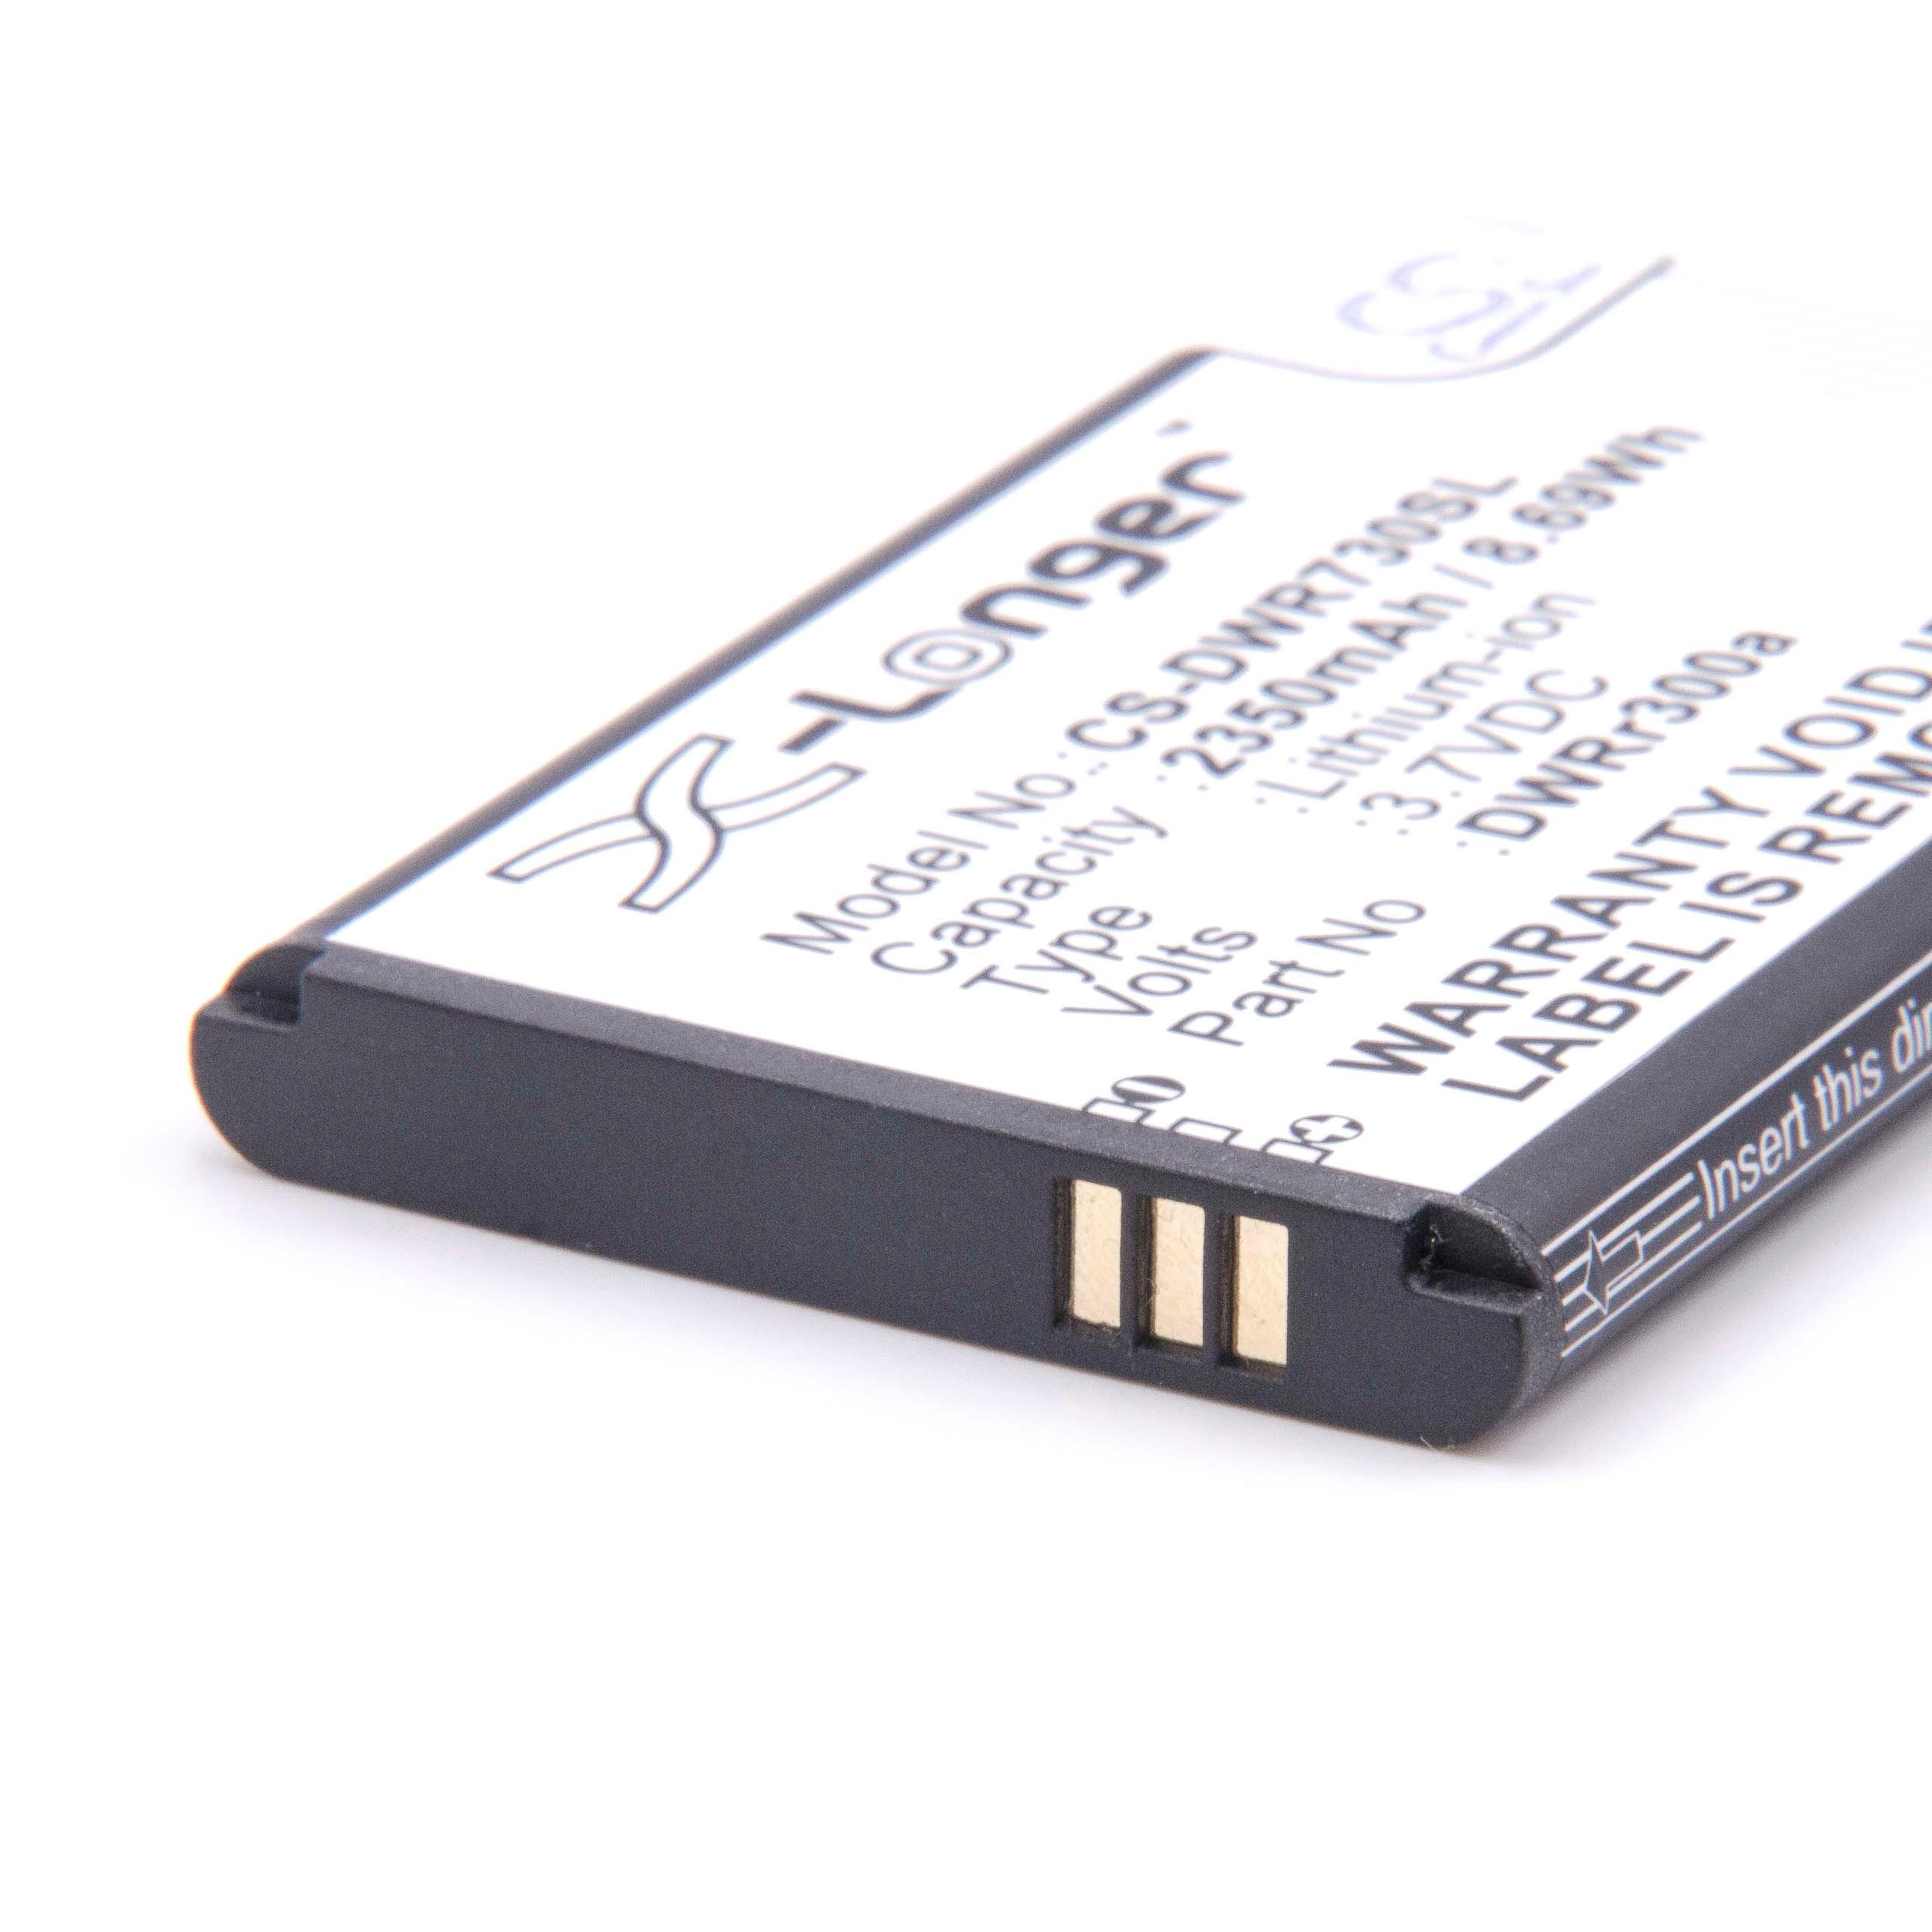 Mobile Router Battery Replacement for D-Link DWR300a, 6BT-R300A-291, 6BT-R600B-2902 - 2350mAh 3.7V Li-Ion